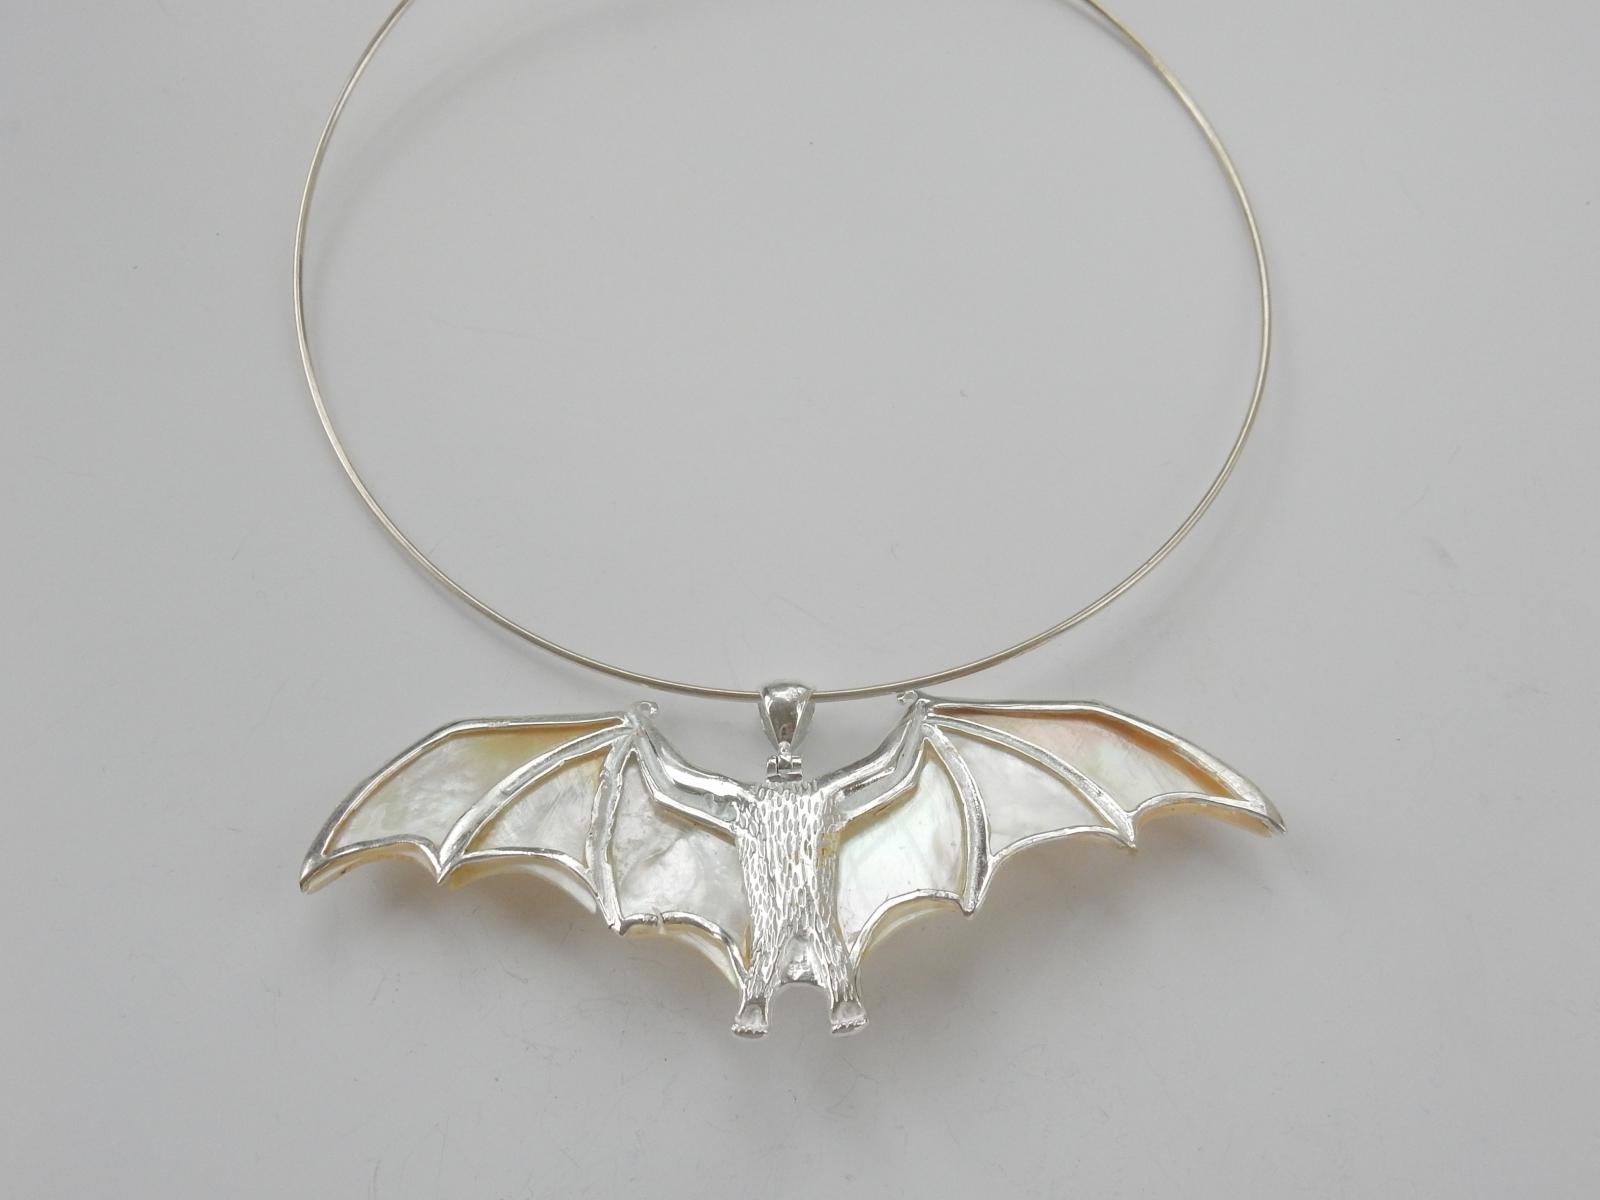 Buy Bat Pendant Sterling Silver Mystical Creature Jewelry Online in India -  Etsy